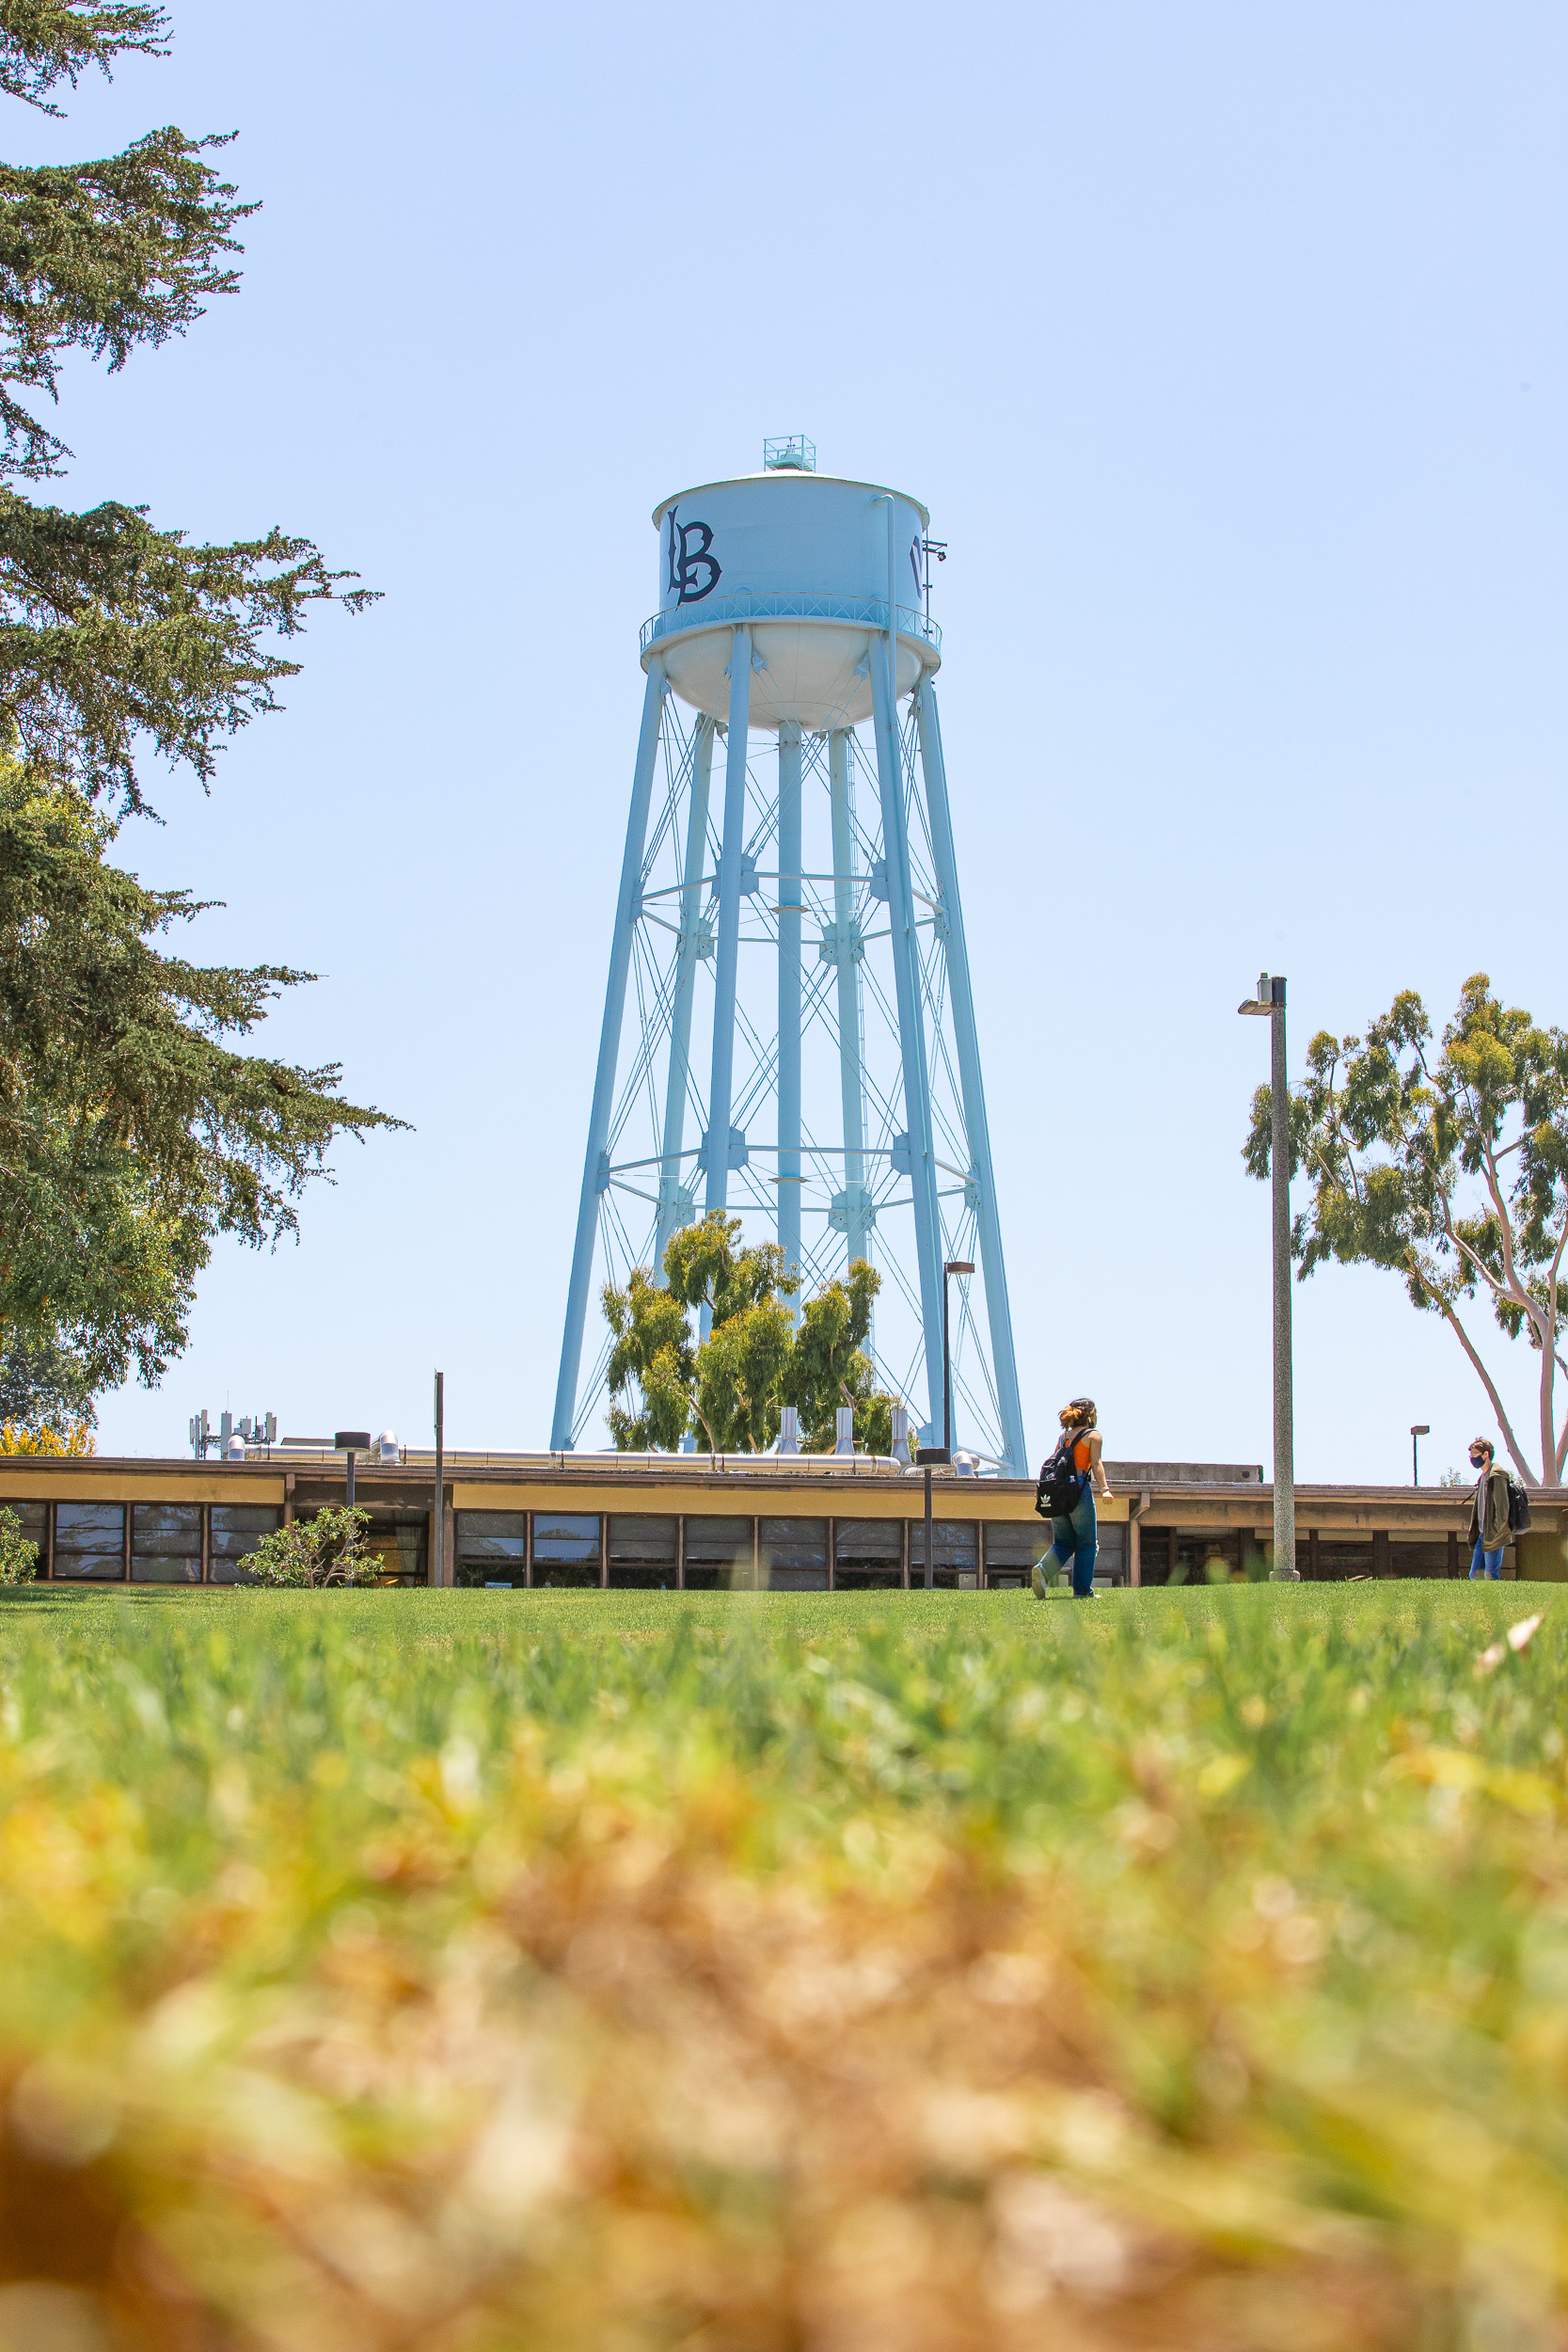 View of the LB water tower